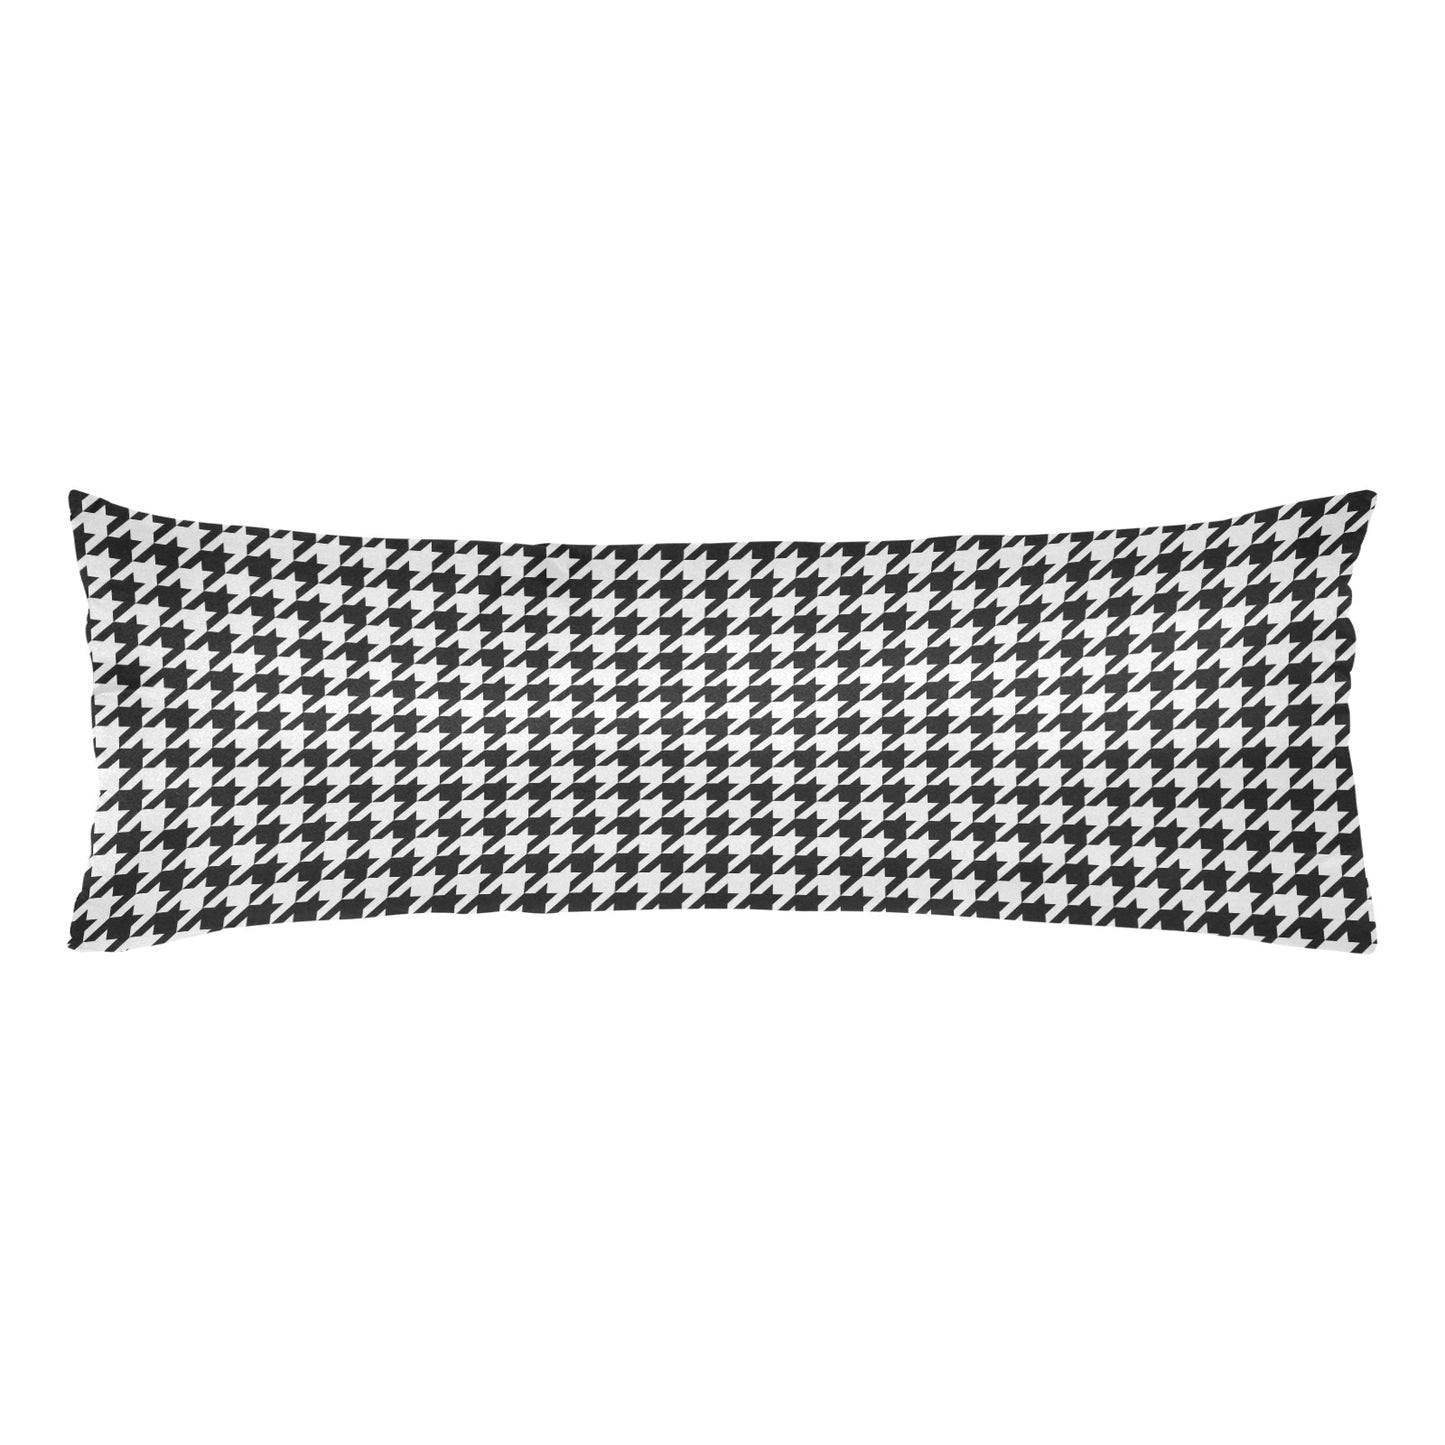 Black White Houndstooth Body Pillow Case, Pattern Long Large Bed Accent Pillowcase Print Throw Decor Decorative Cover